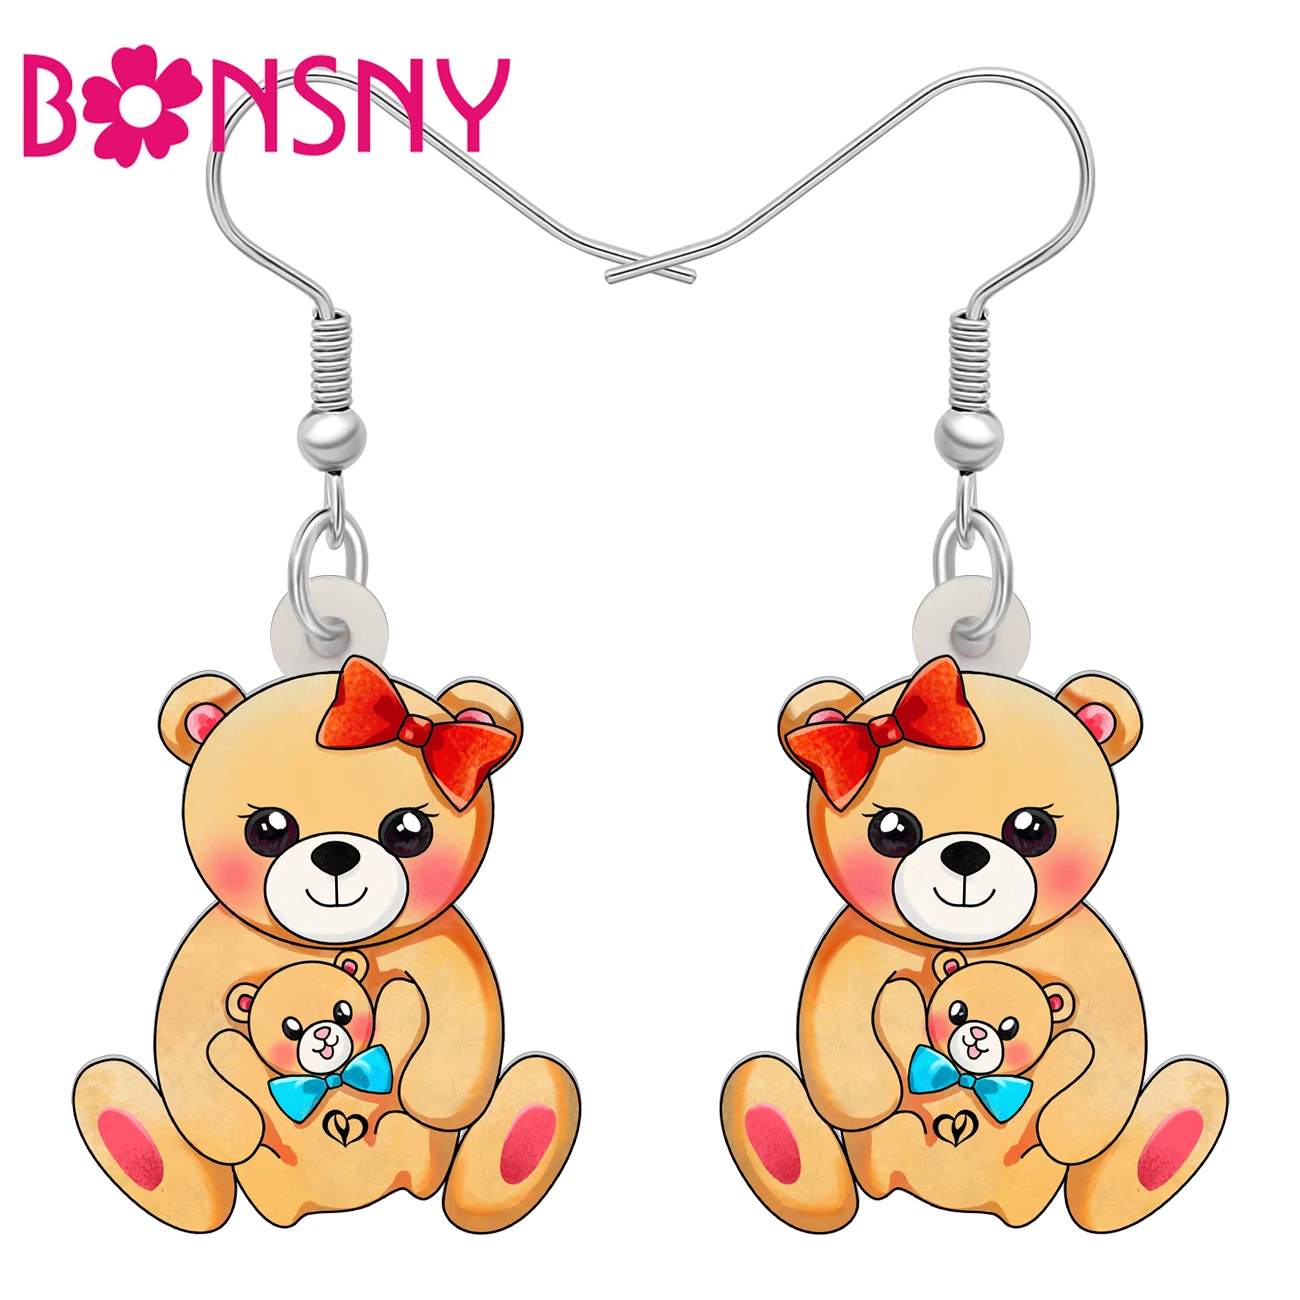 Bonsny Acrylic Mothers Day Bear Babay Earrings Decorations Novelty Dangle Drop Charms Jewelry For Women Girls Gifts Accessories